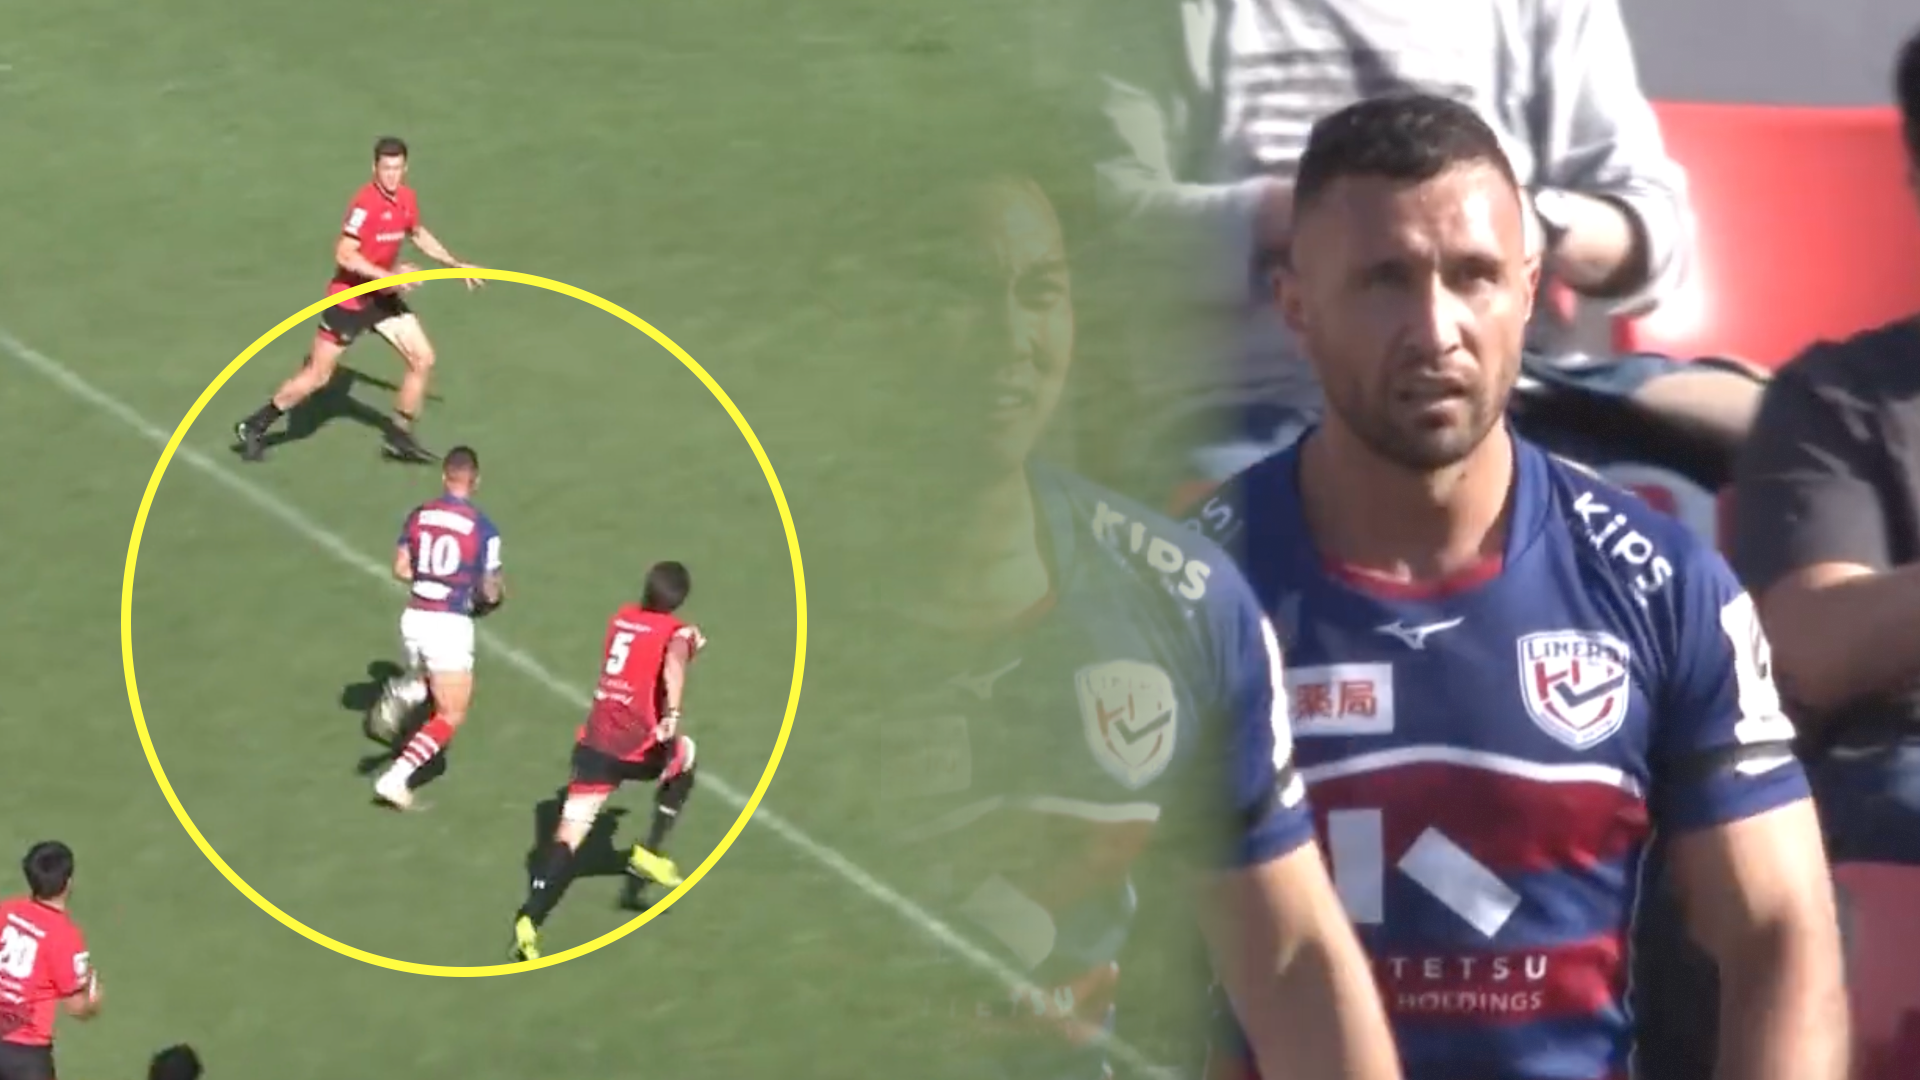 Quade Cooper might have produced his best assist yet